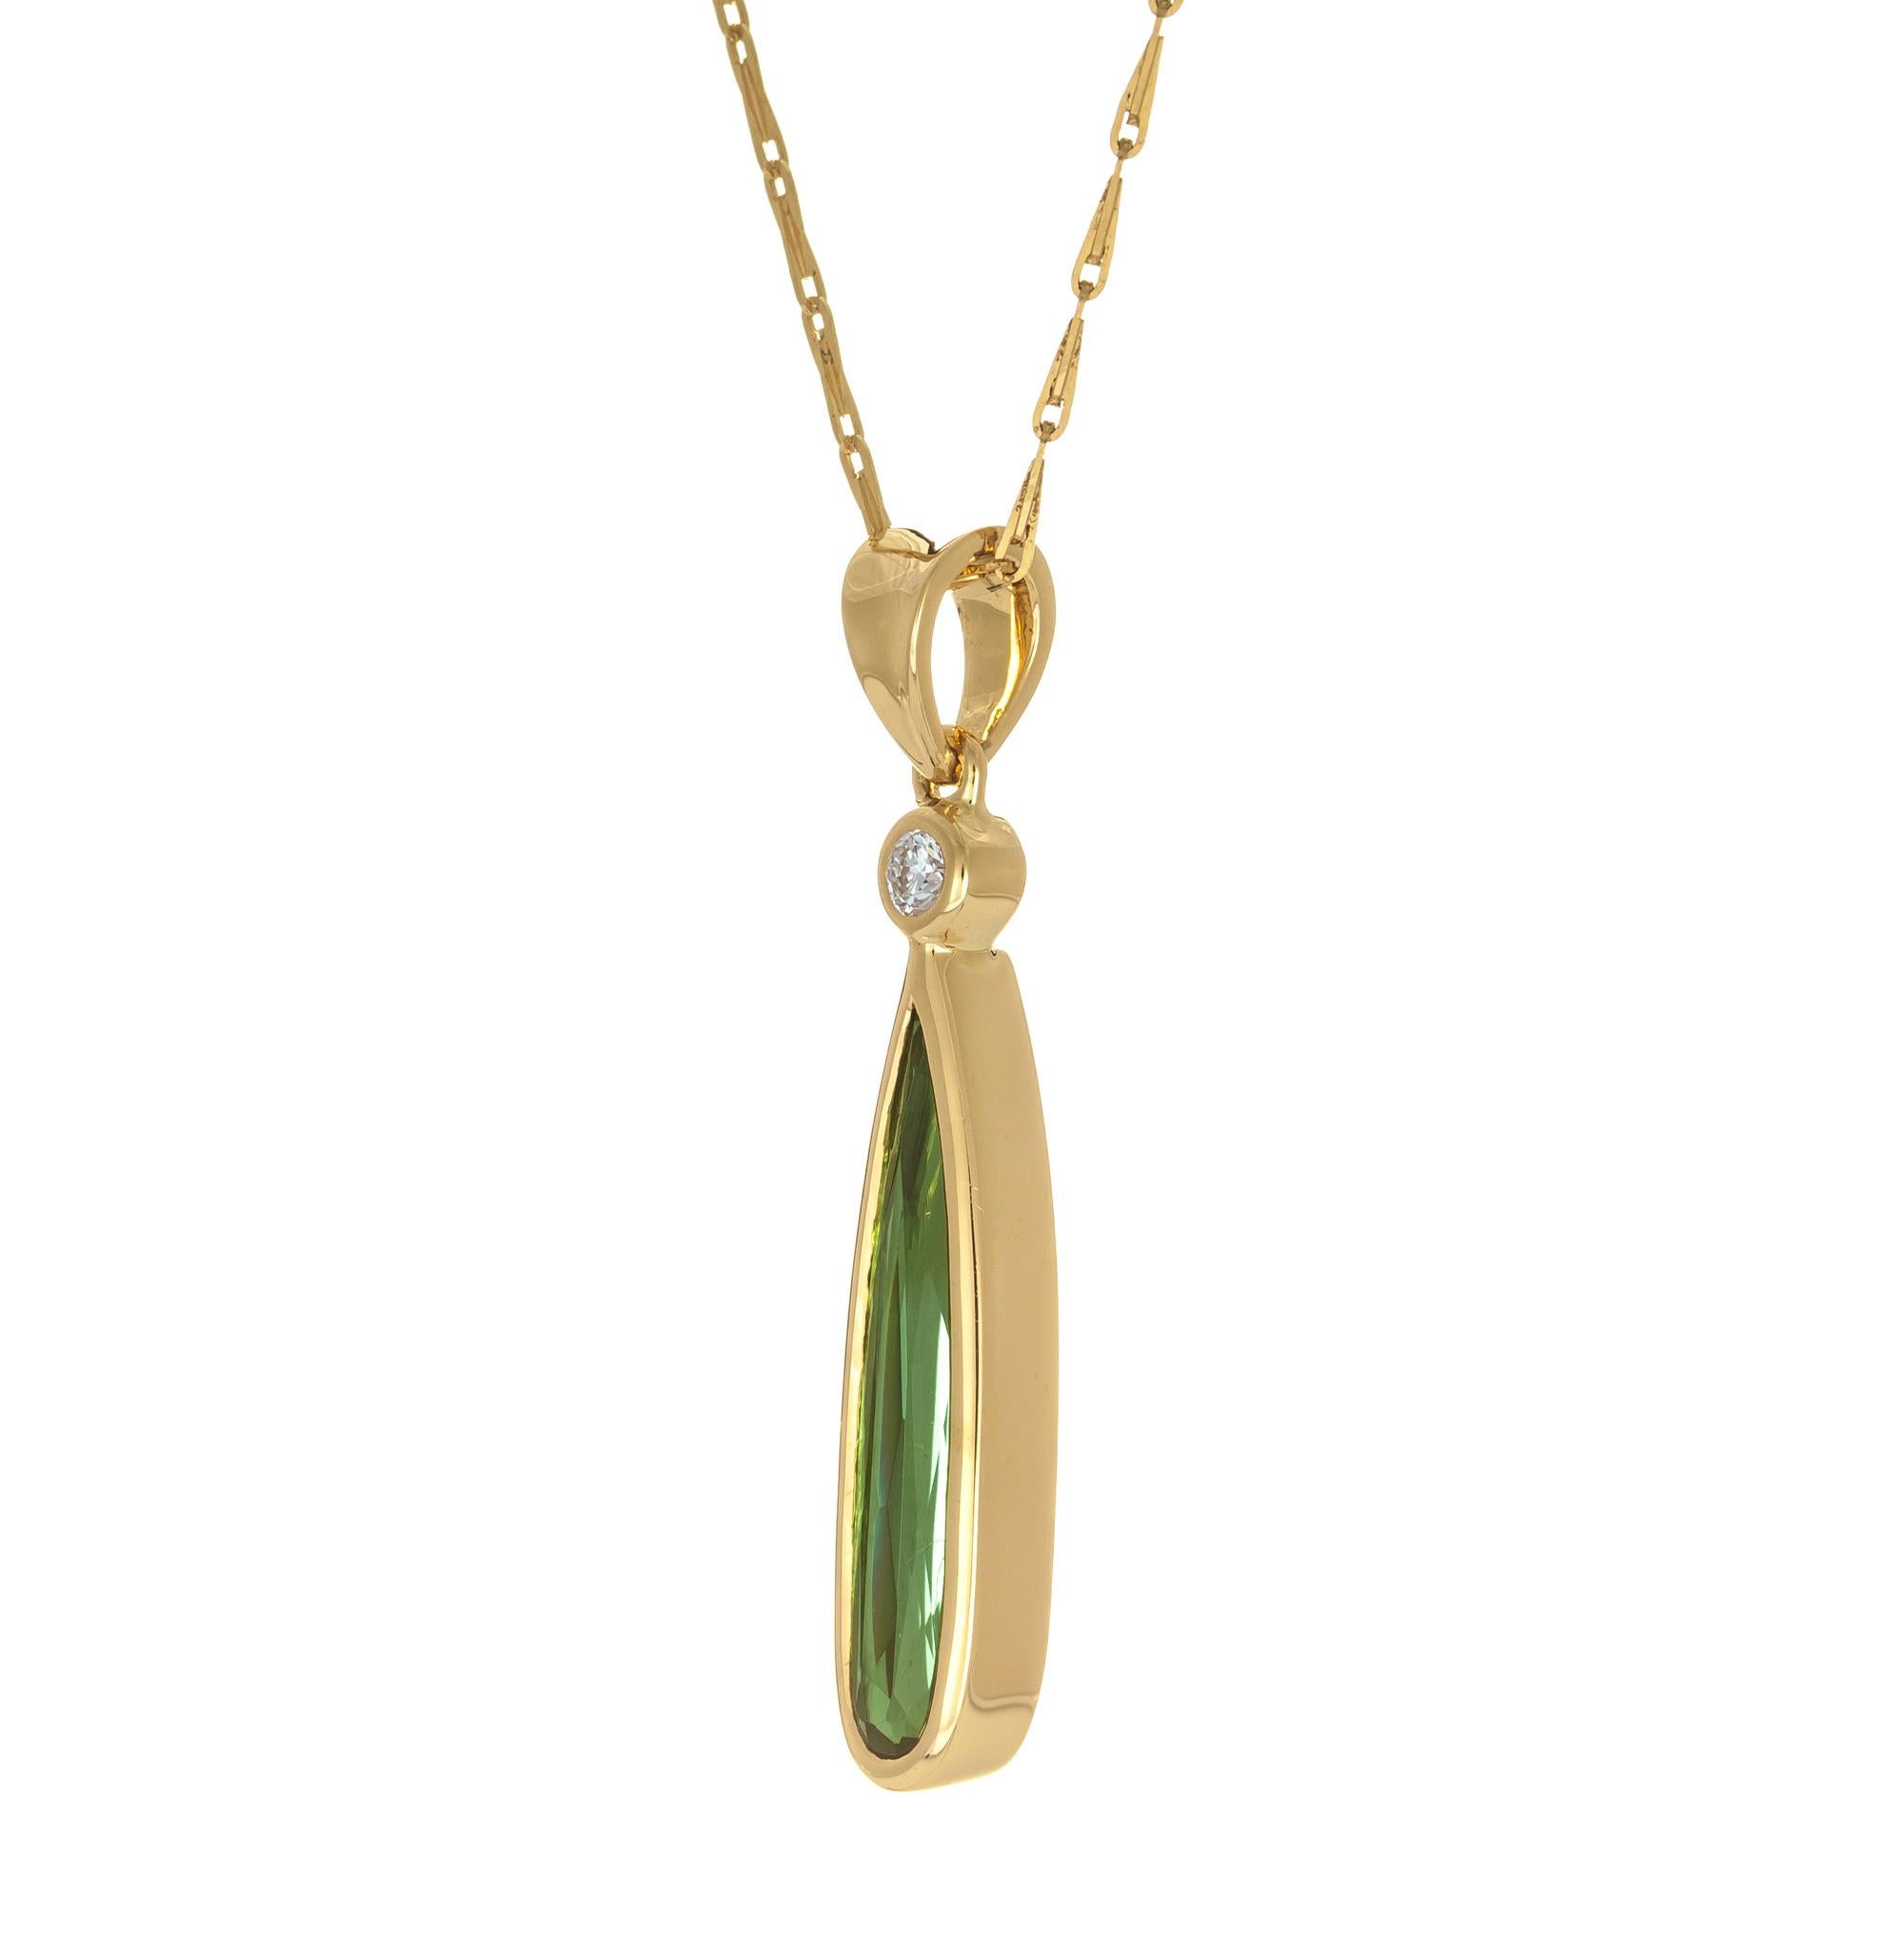 Pear Cut Peter Suchy 1.94 Carat Green Tourmaline Diamond Yellow Gold Pendant Necklace For Sale